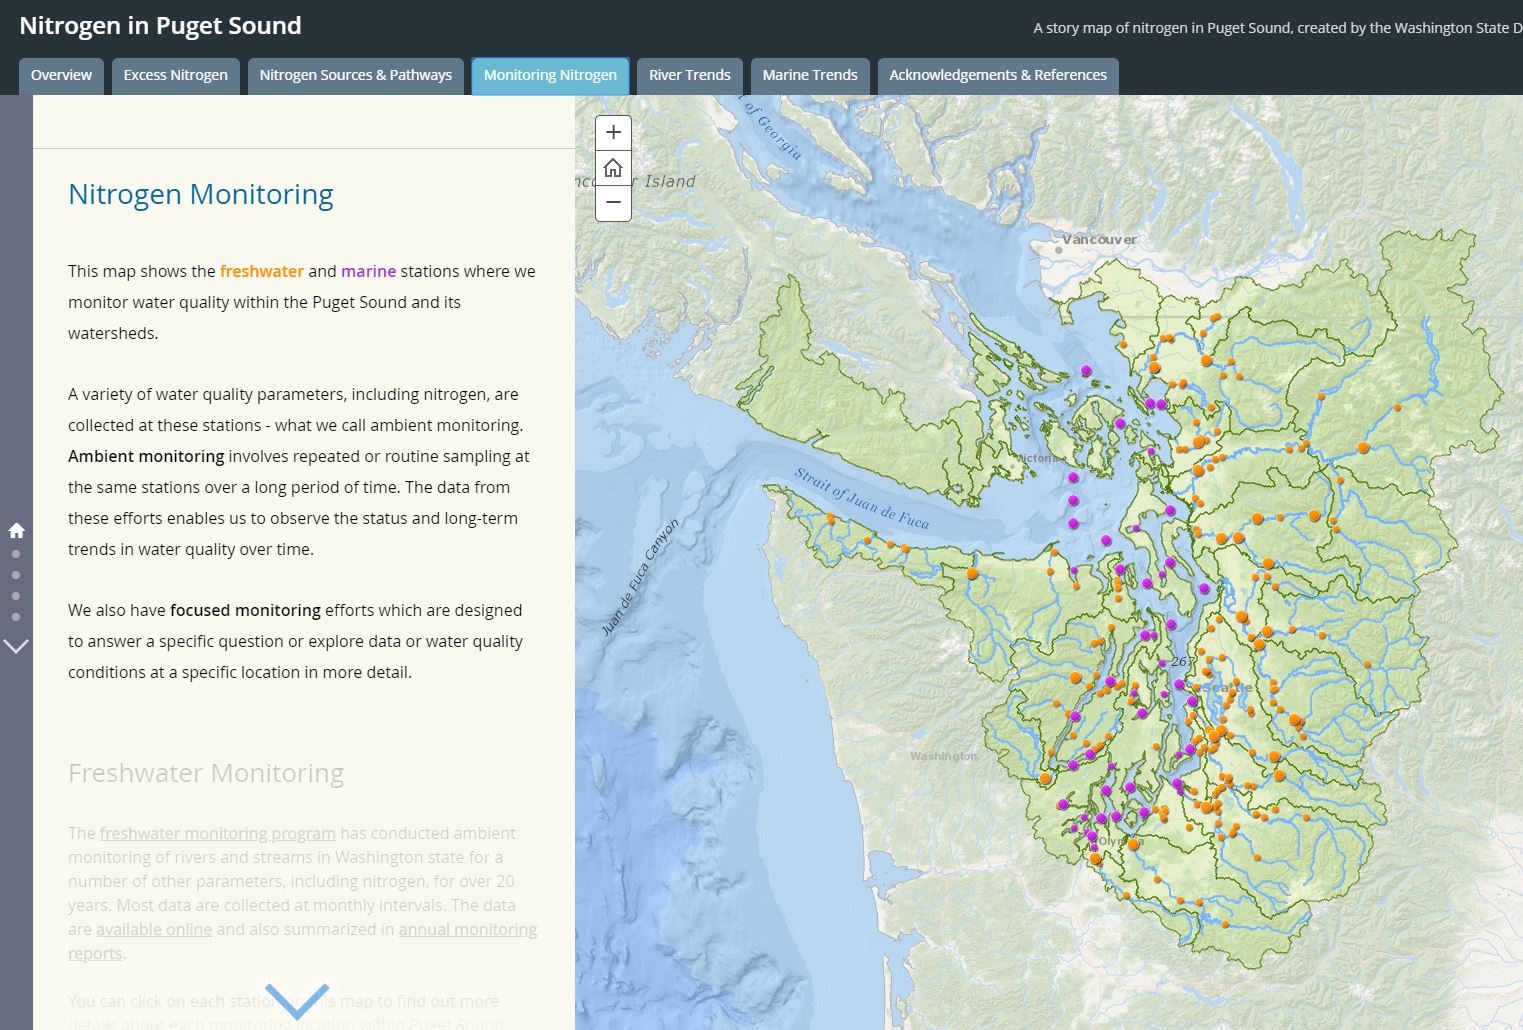 Screenshot of the Nitrogen in Puget Sound storymap, with text and map of Puget Sound